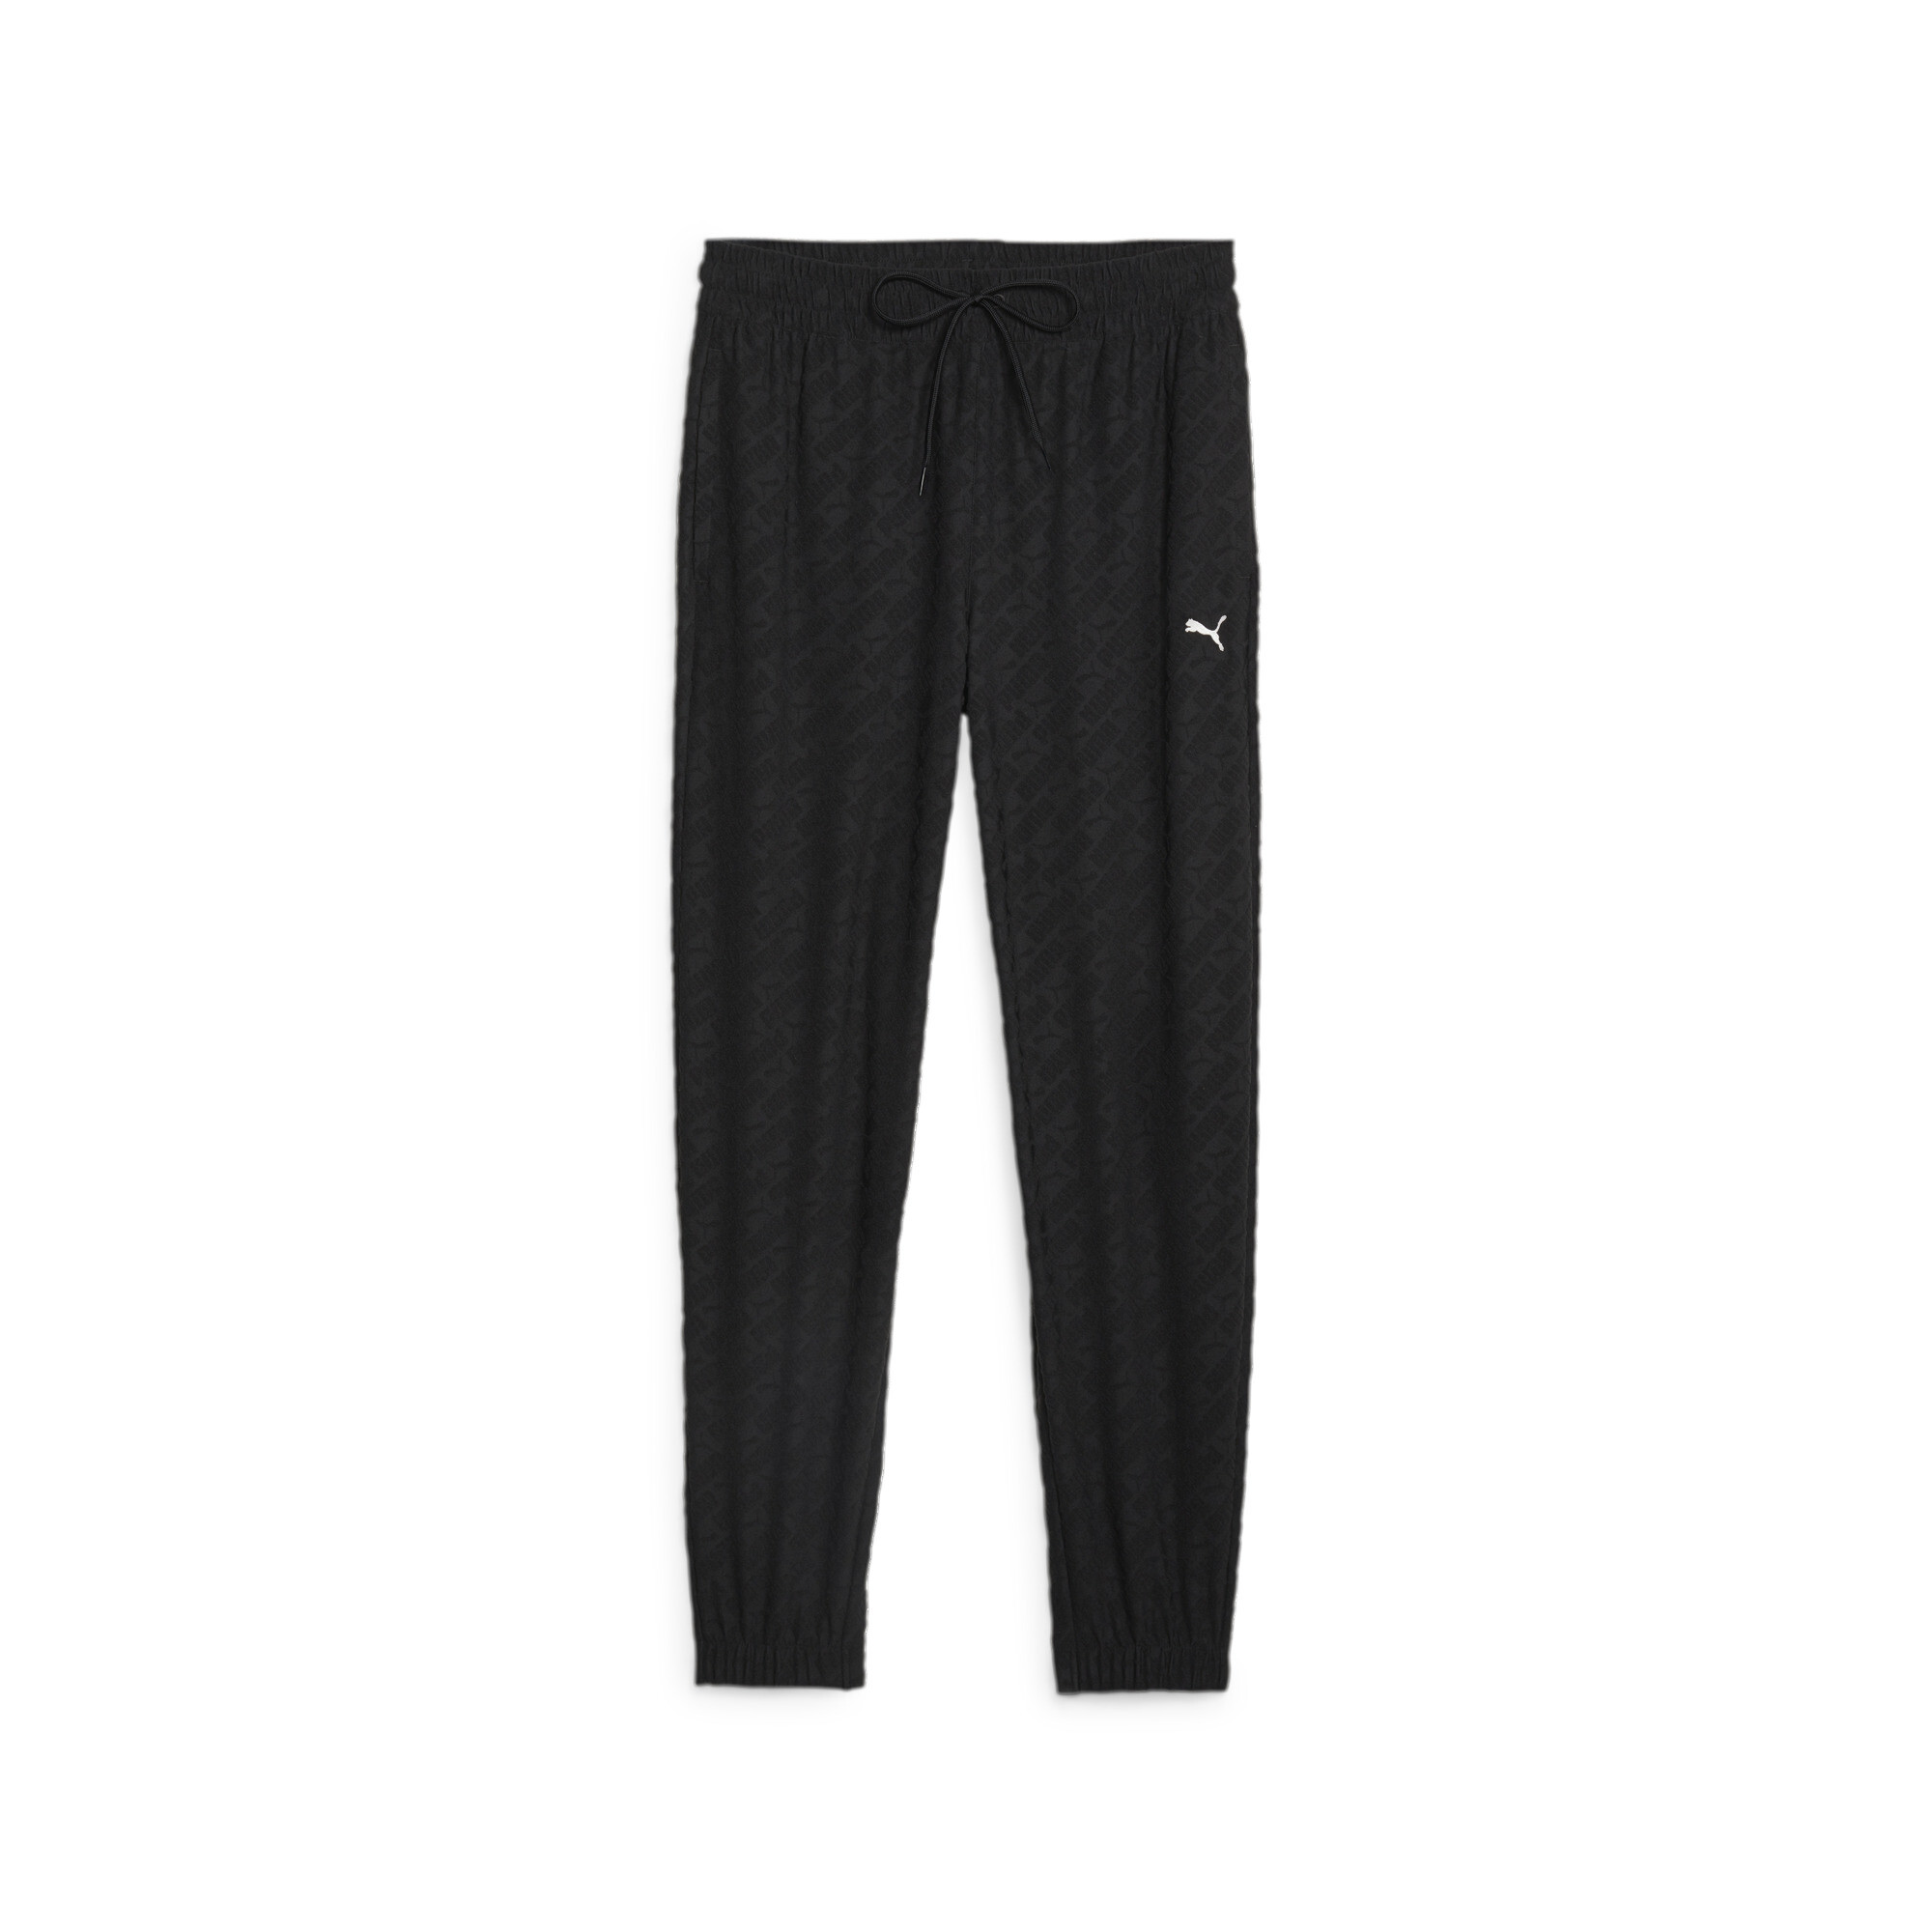 Women's PUMA Fit Training Branded Jogger In Black, Size 2XL